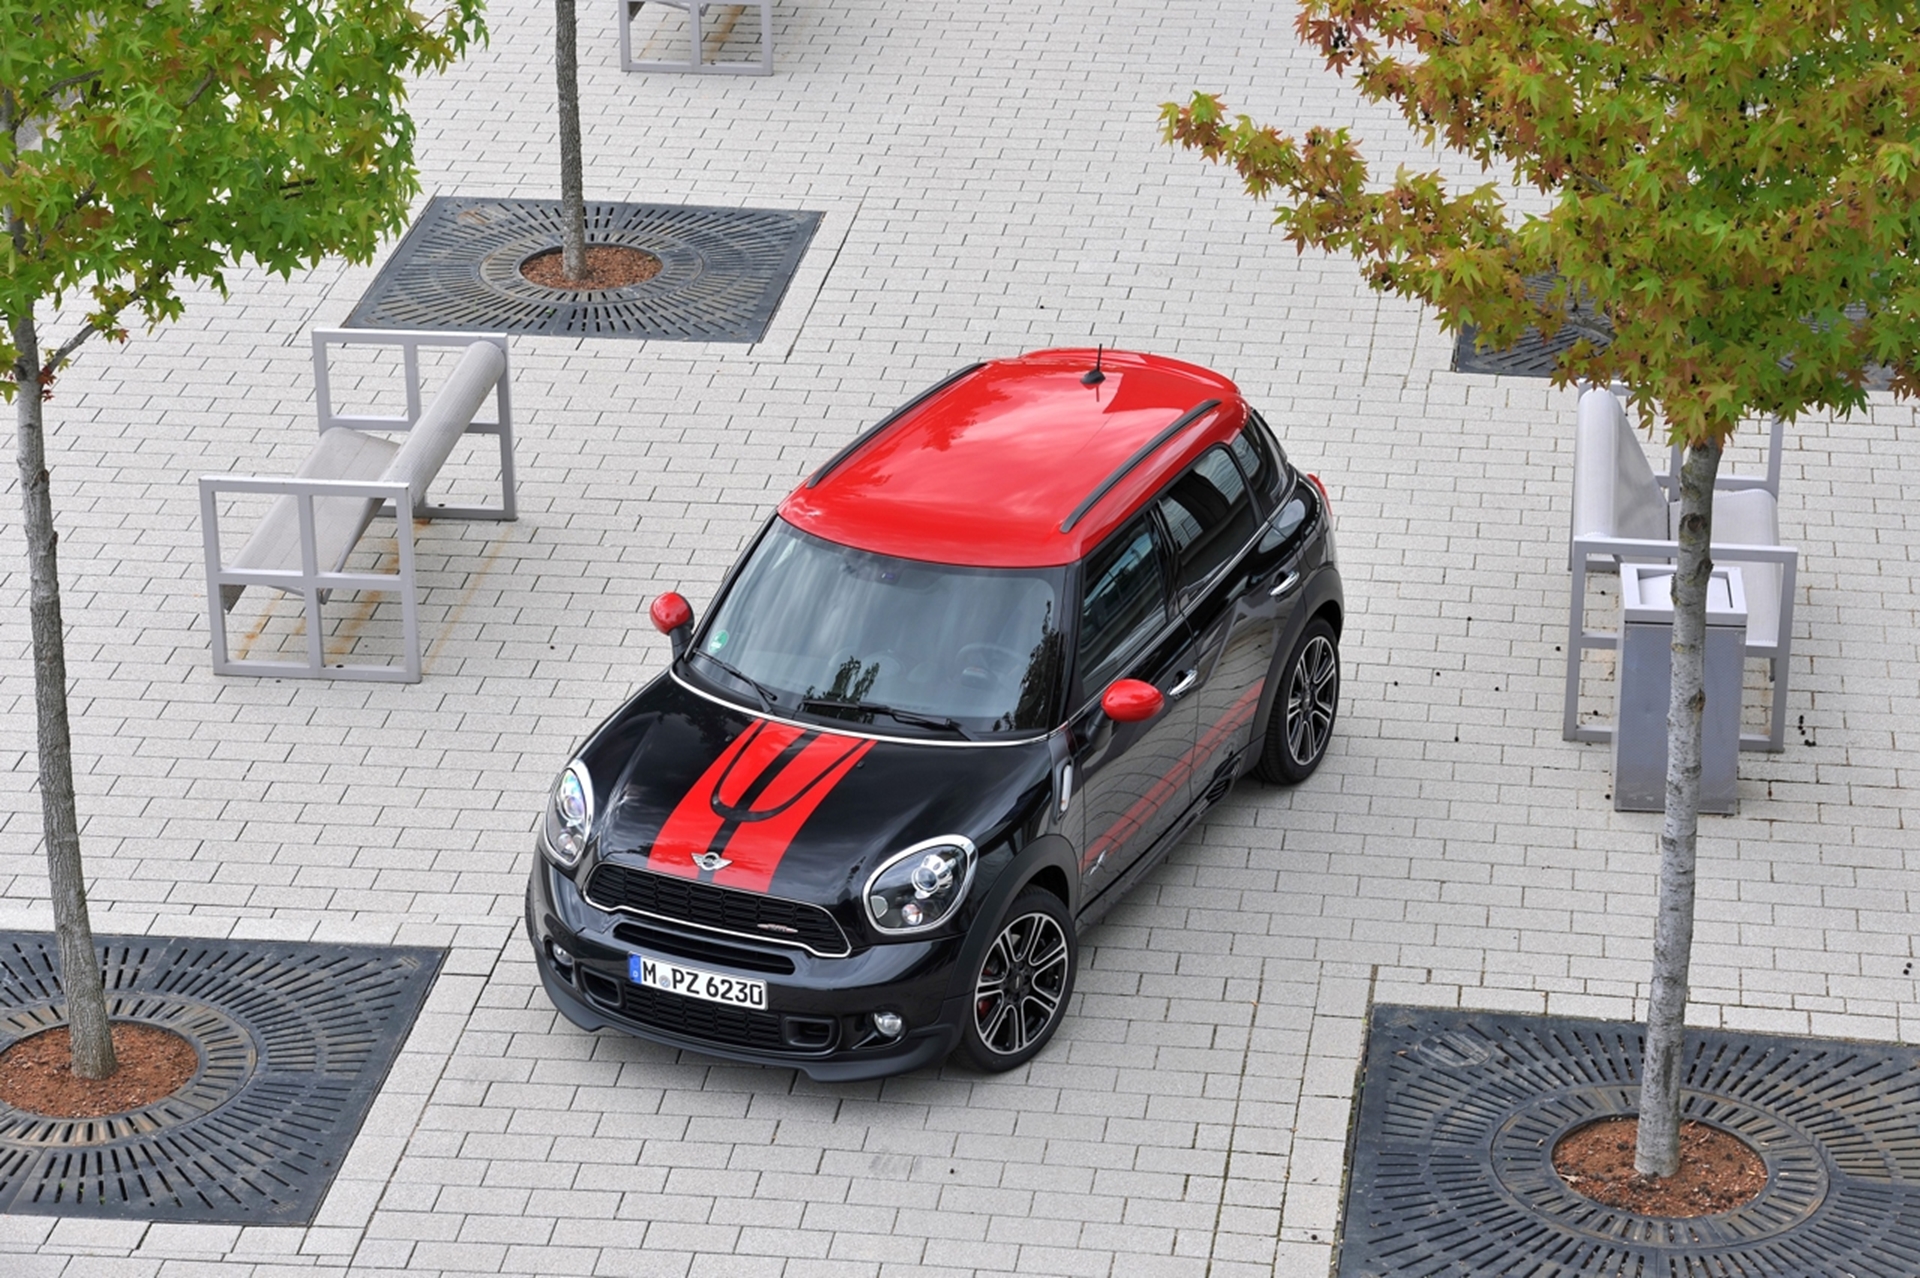 MINI John Cooper Works Countryman more power, more space, more individuality Concept and design.